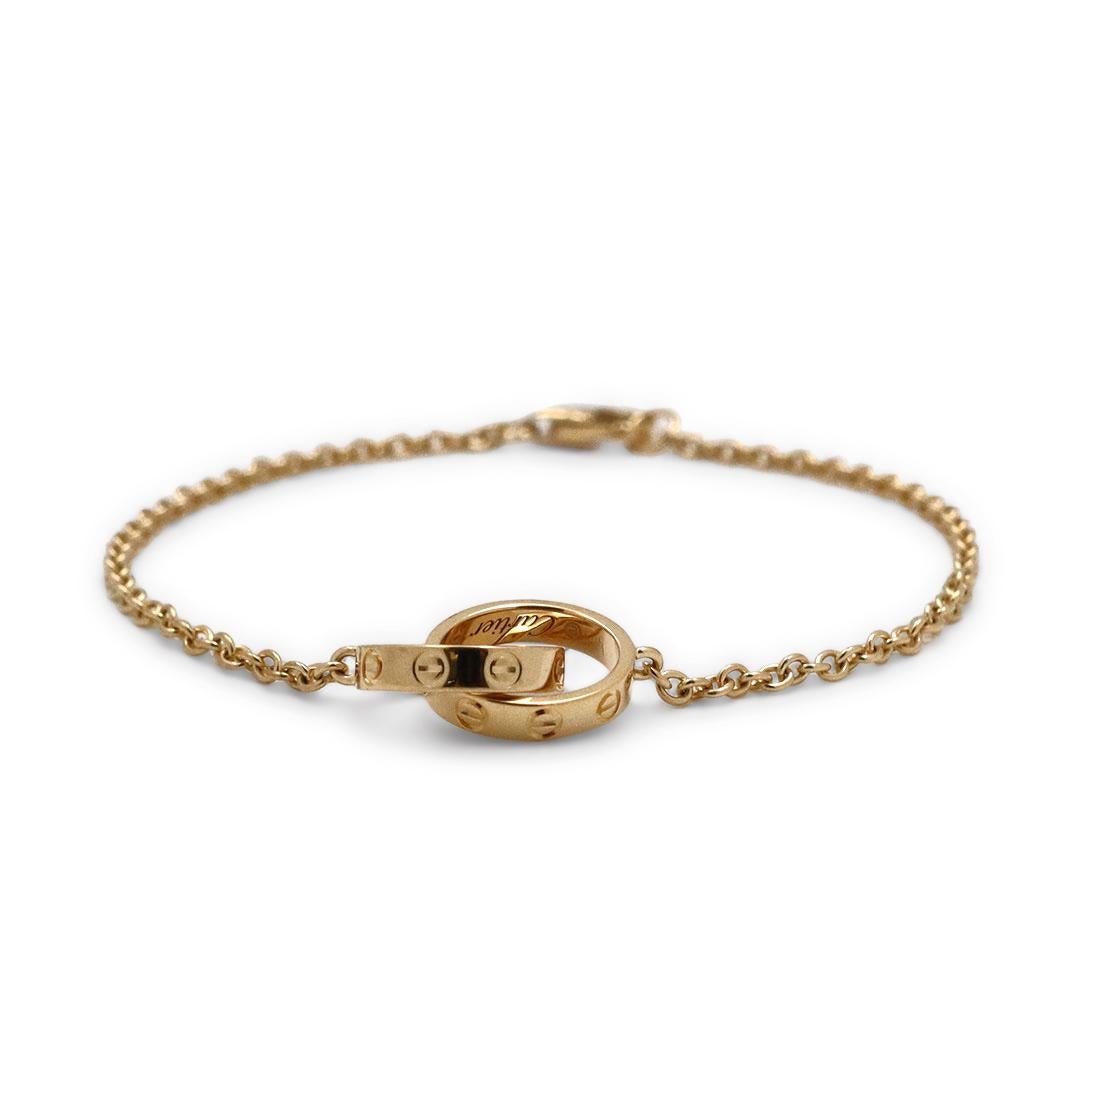 Authentic Cartier 'Love' bracelet crafted in 18 karat yellow gold features two interlocking ove rings in miniature form.  Fits up to a 6-inch wrist. Signed Cartier, Au750, with serial number and hallmarks. Bracelet is not presented with the original